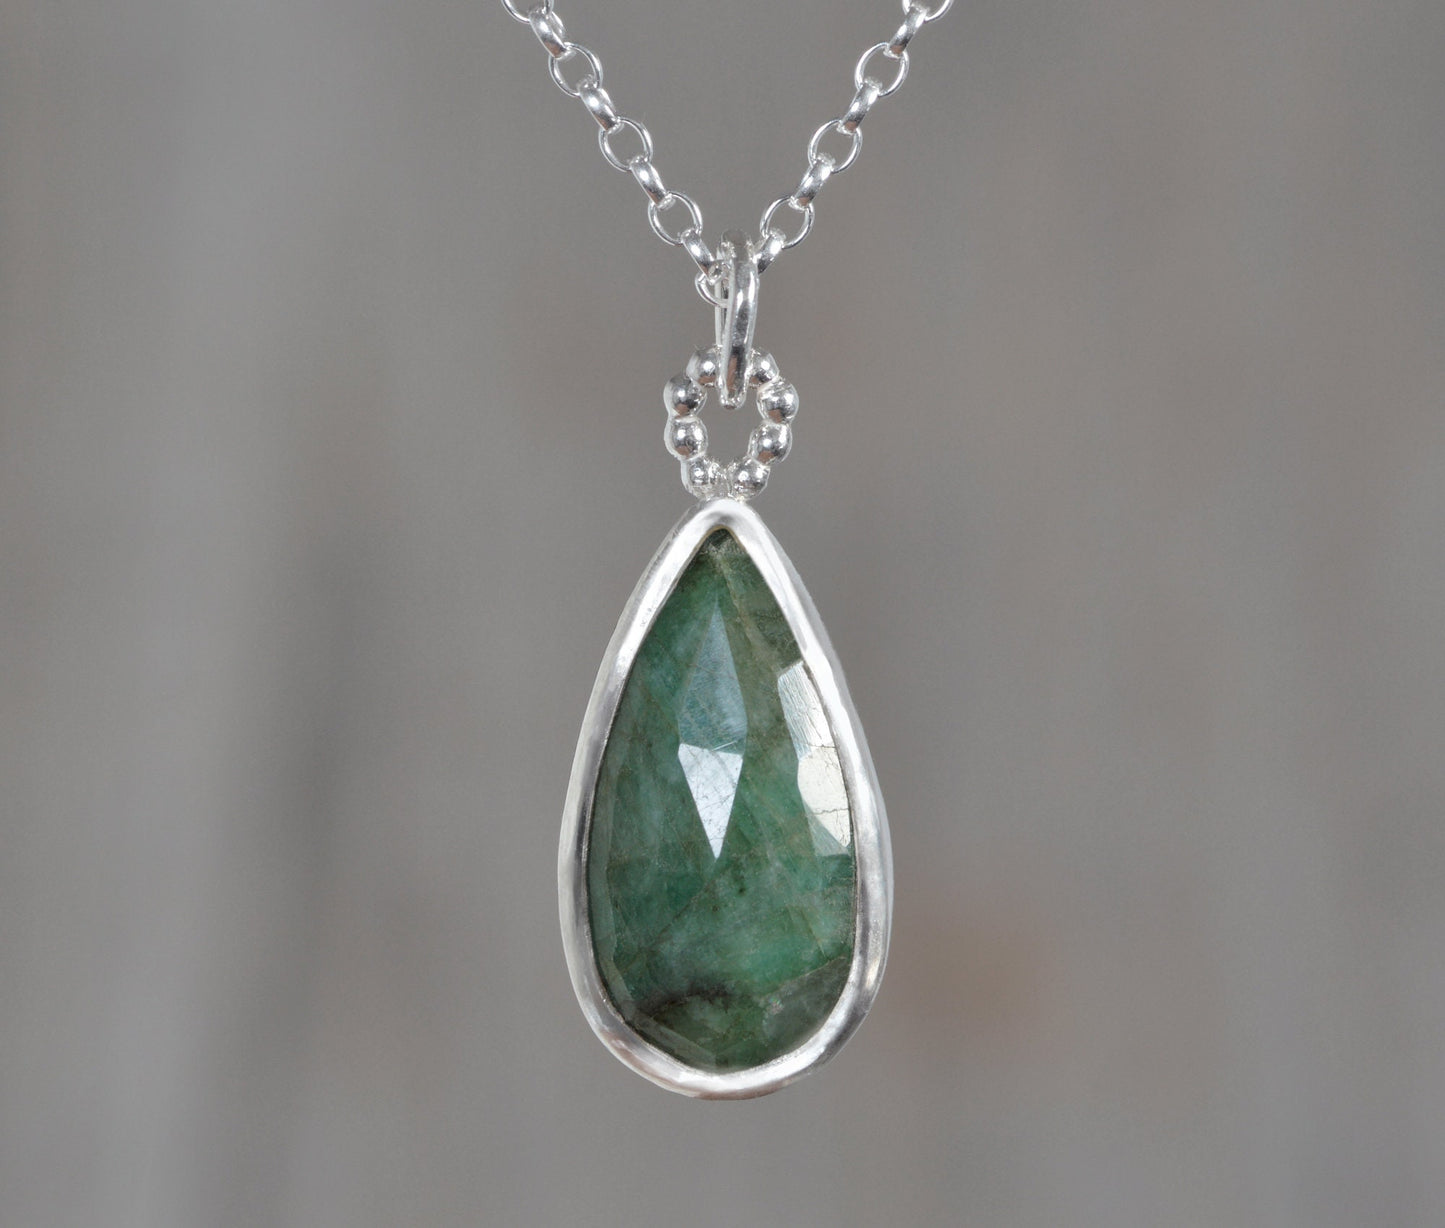 Raindrop Emerald Necklace, 5.45ct Emerald Necklace, May Birthstone Necklace